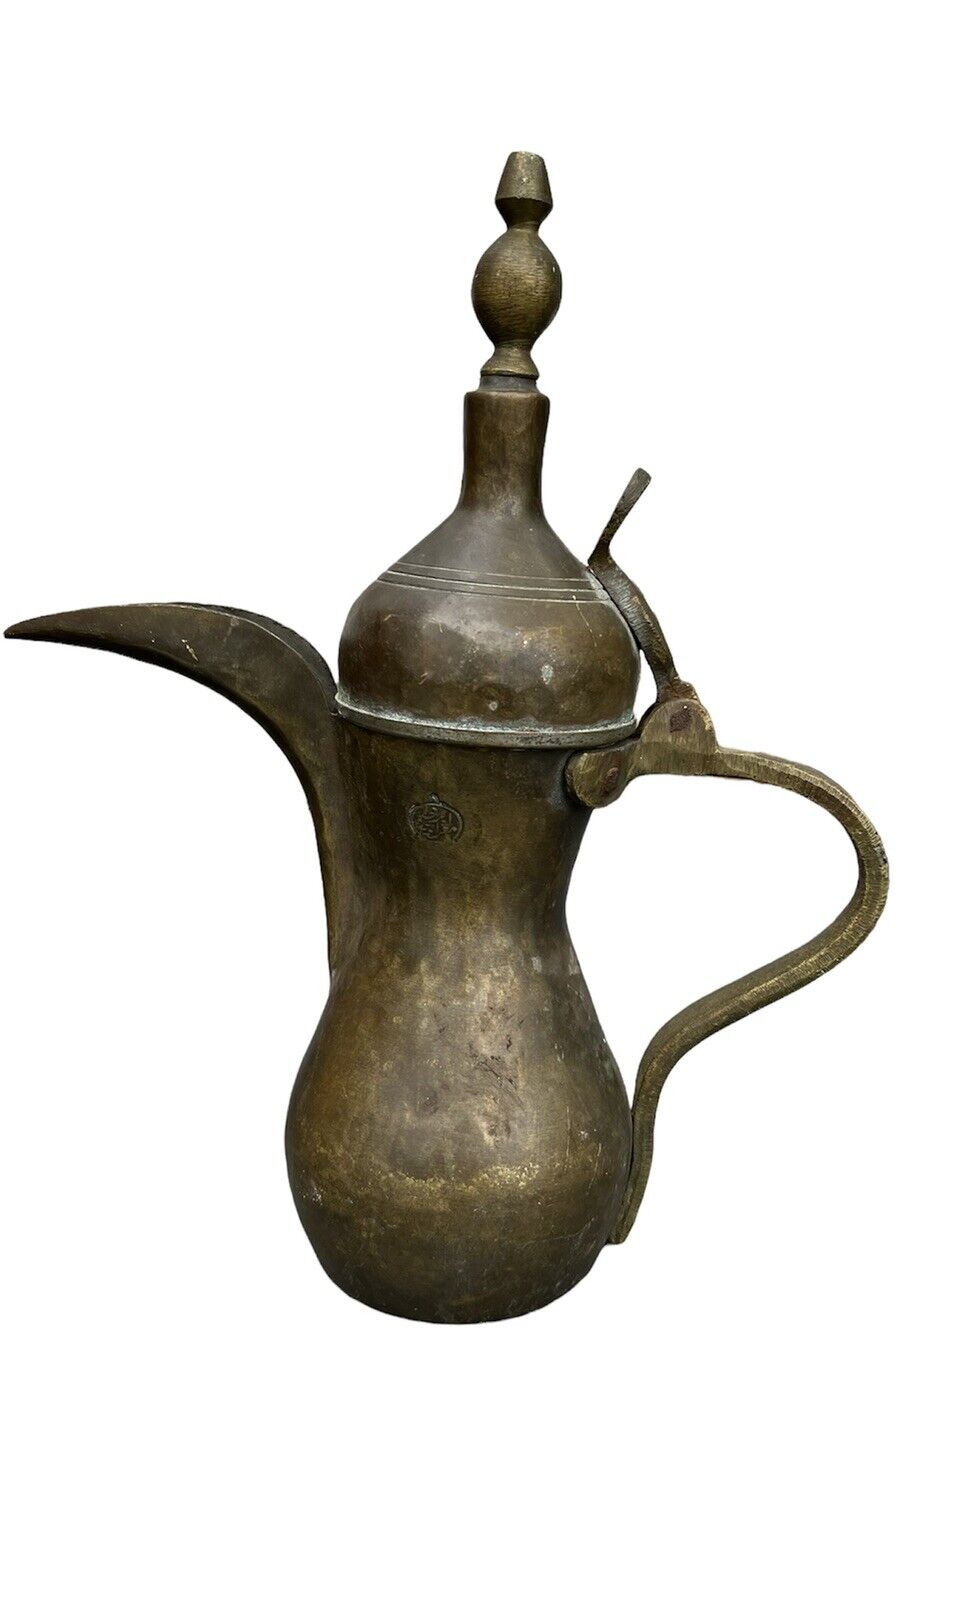 Ottoman Turkish Antique Coffee / Mira Pot With a Handle